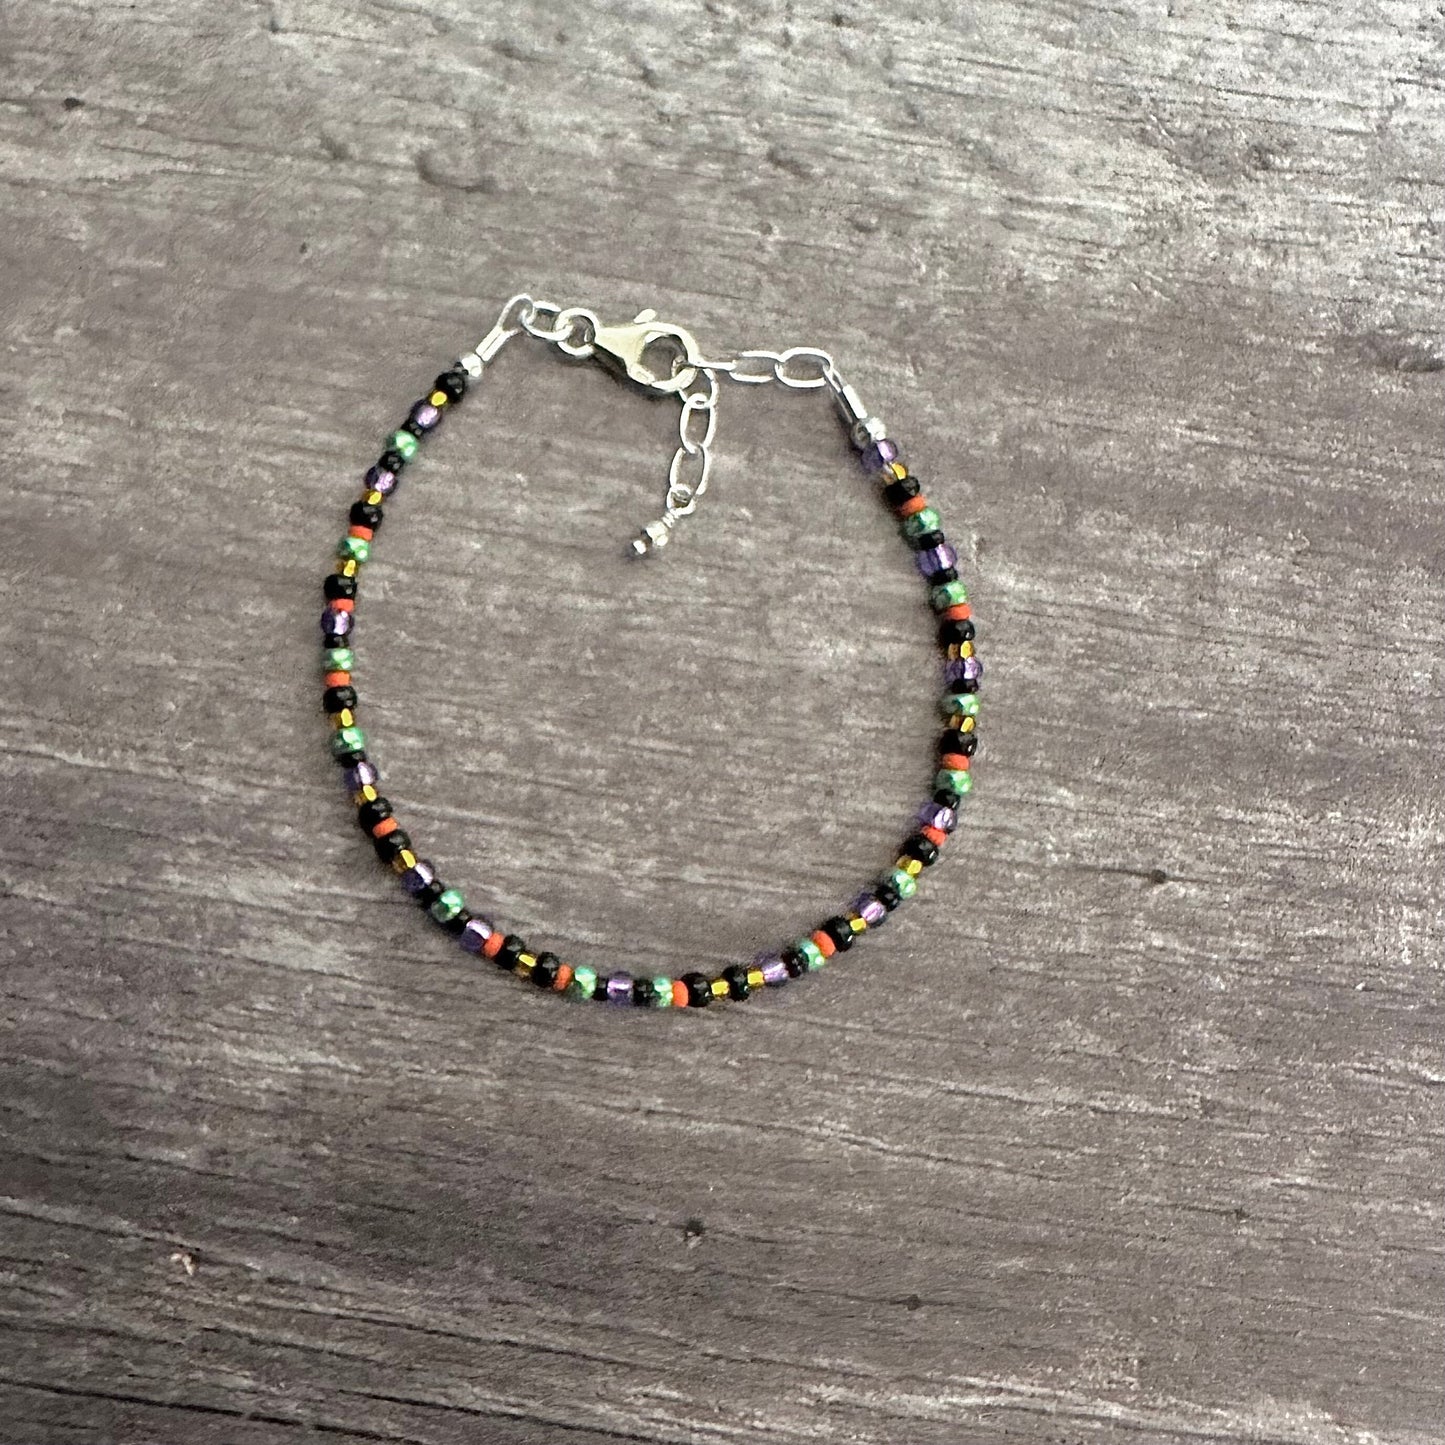 Bright & Black Bracelet with seed beads